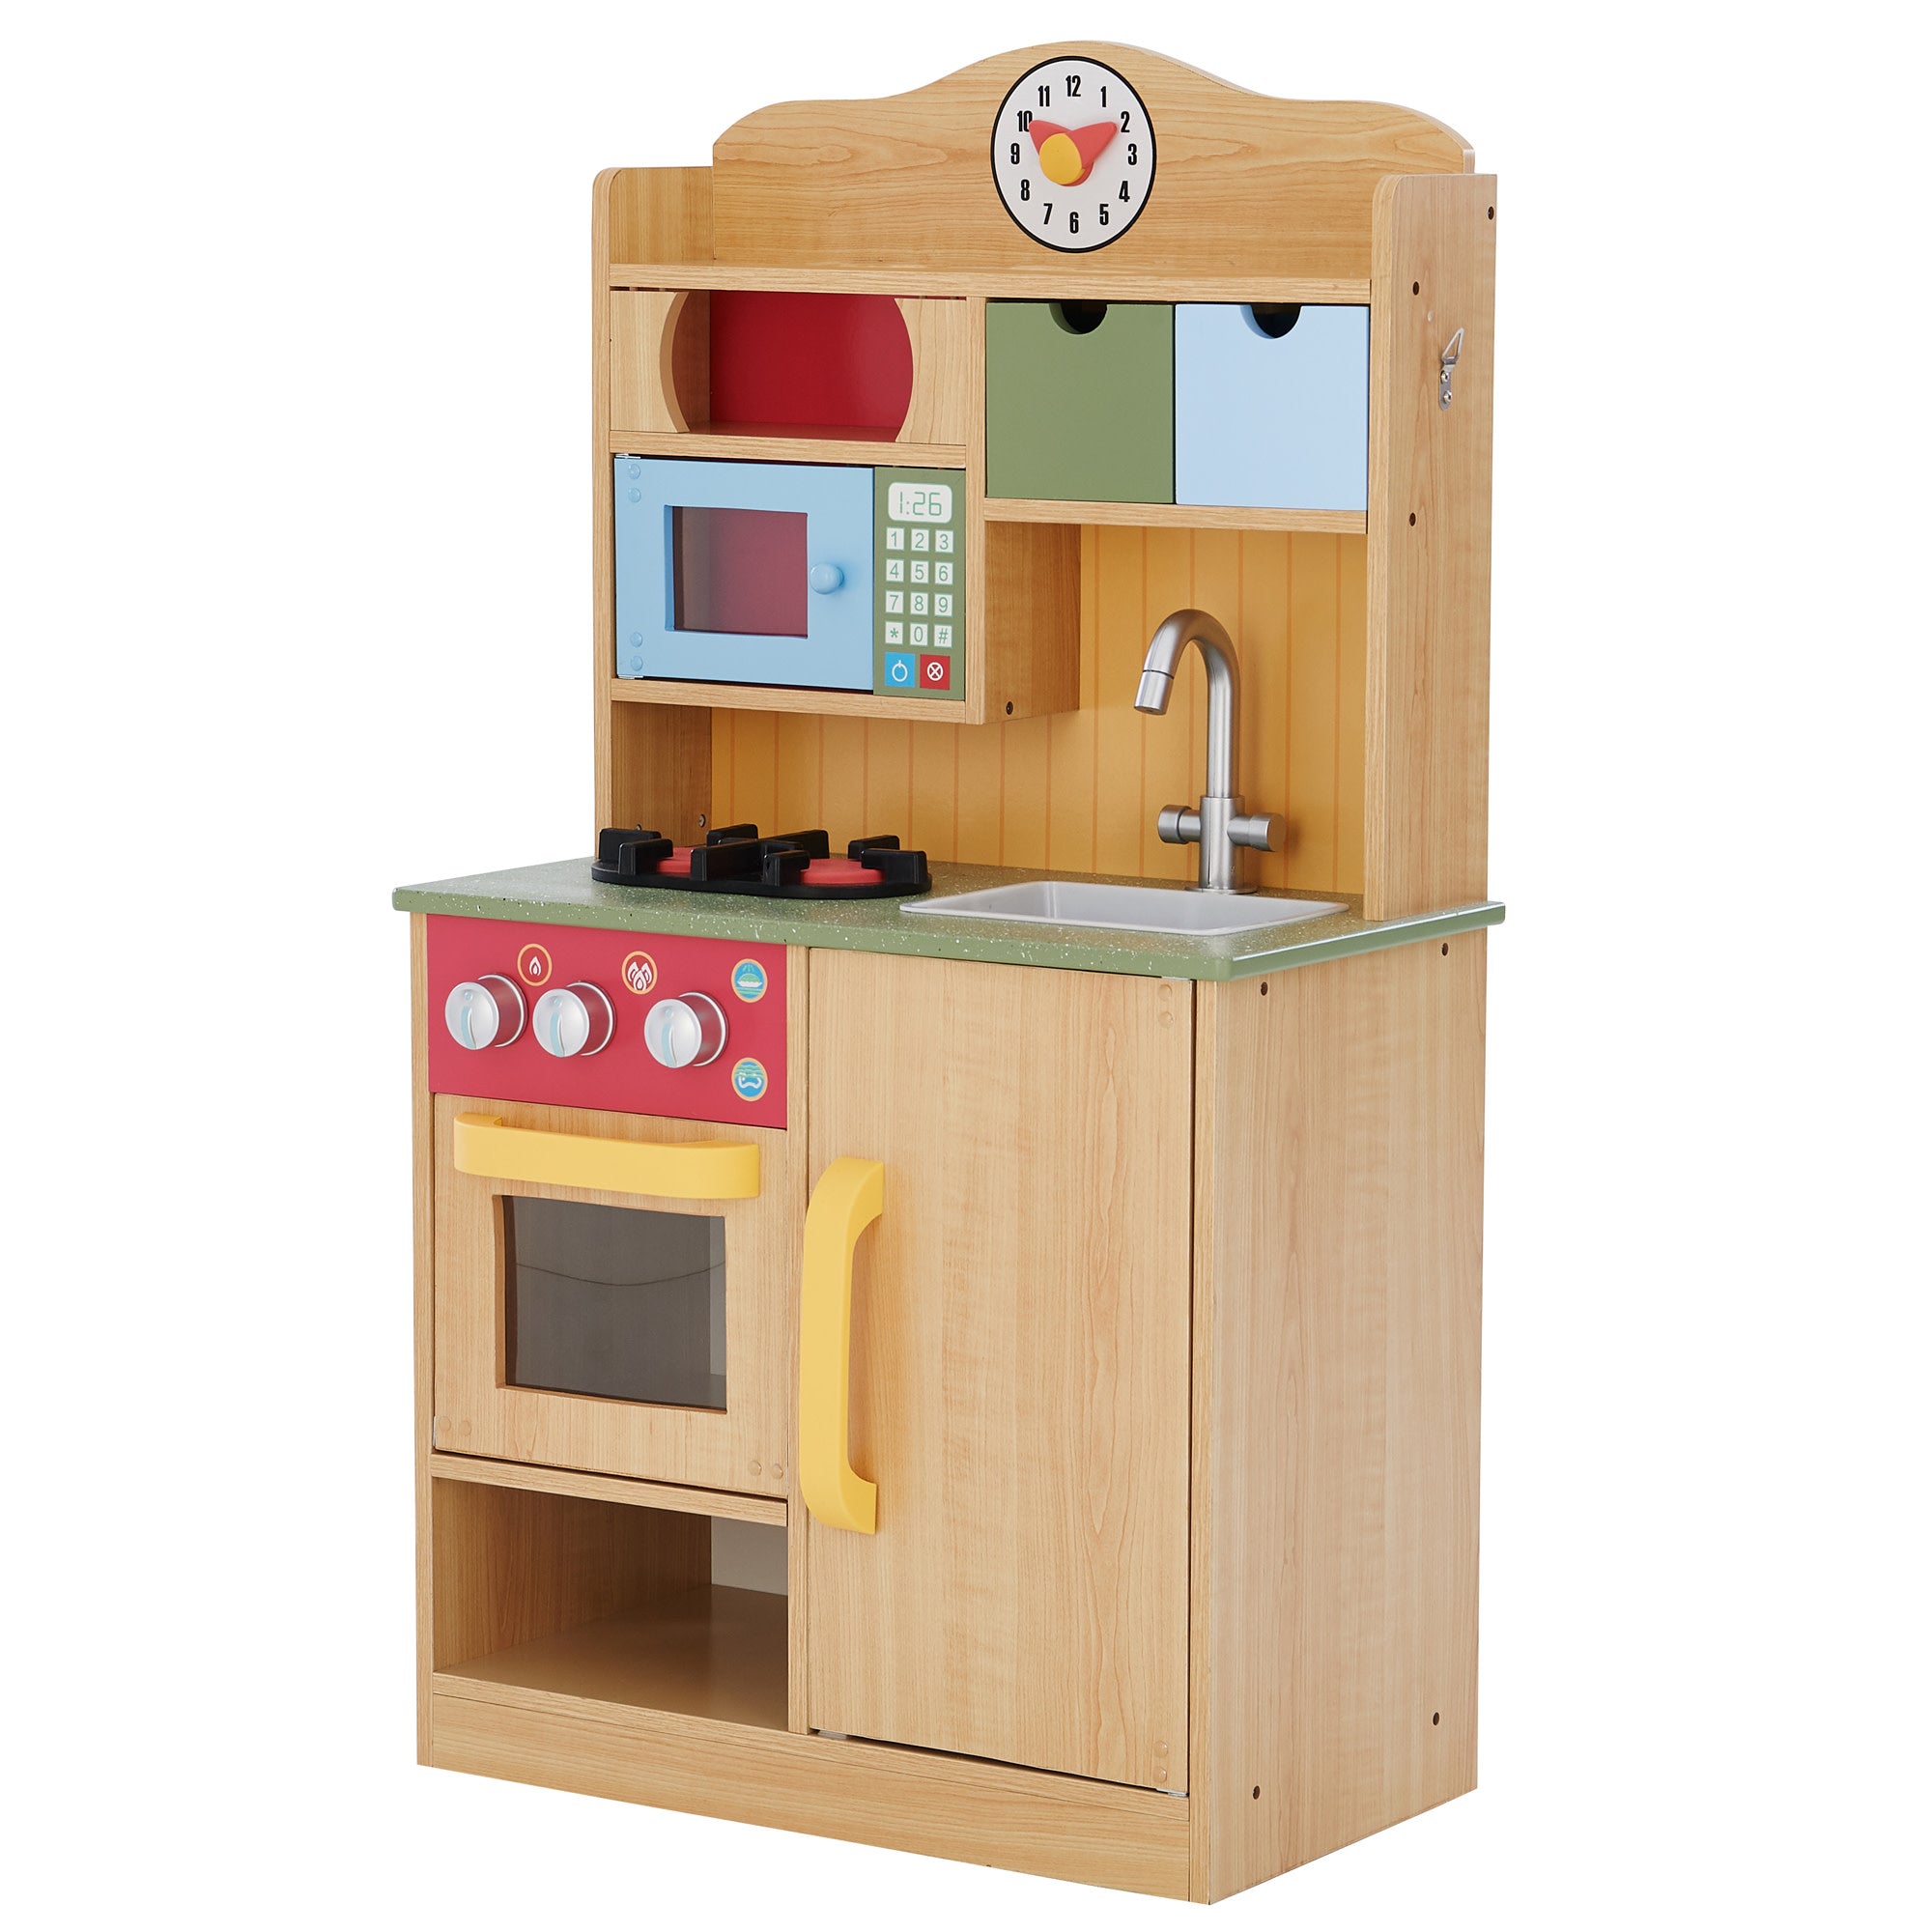 Teamson Kids Little Chef Florence Classic Play Kitchen with 5 Kitchen Accessory Toys, Wood Grain